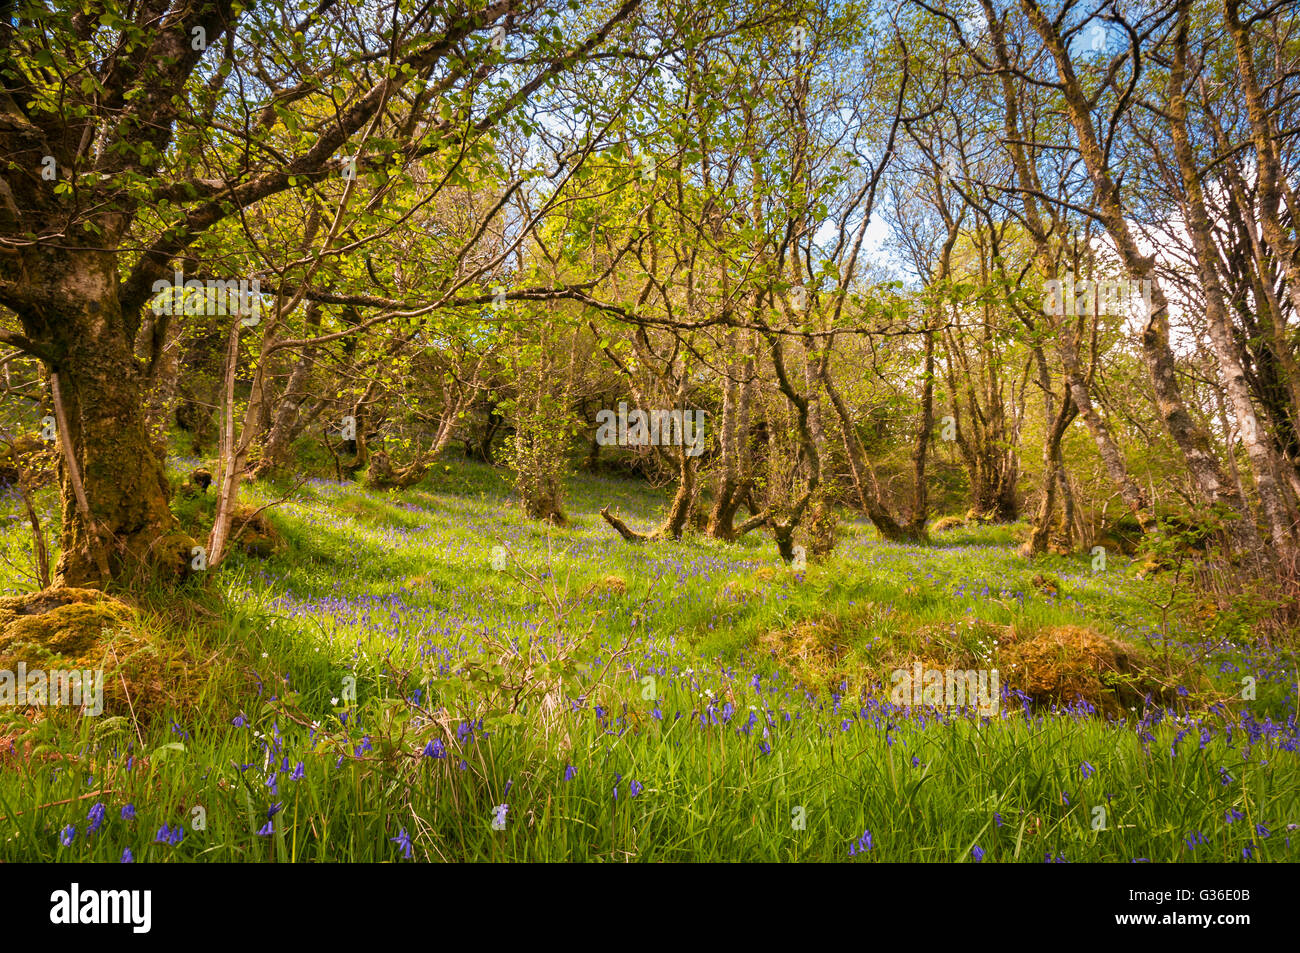 A beautiful patch of Bluebells, Hyacinthoides non-scripts, with dappled light on the floor of a Scottish Highland woodland. Stock Photo